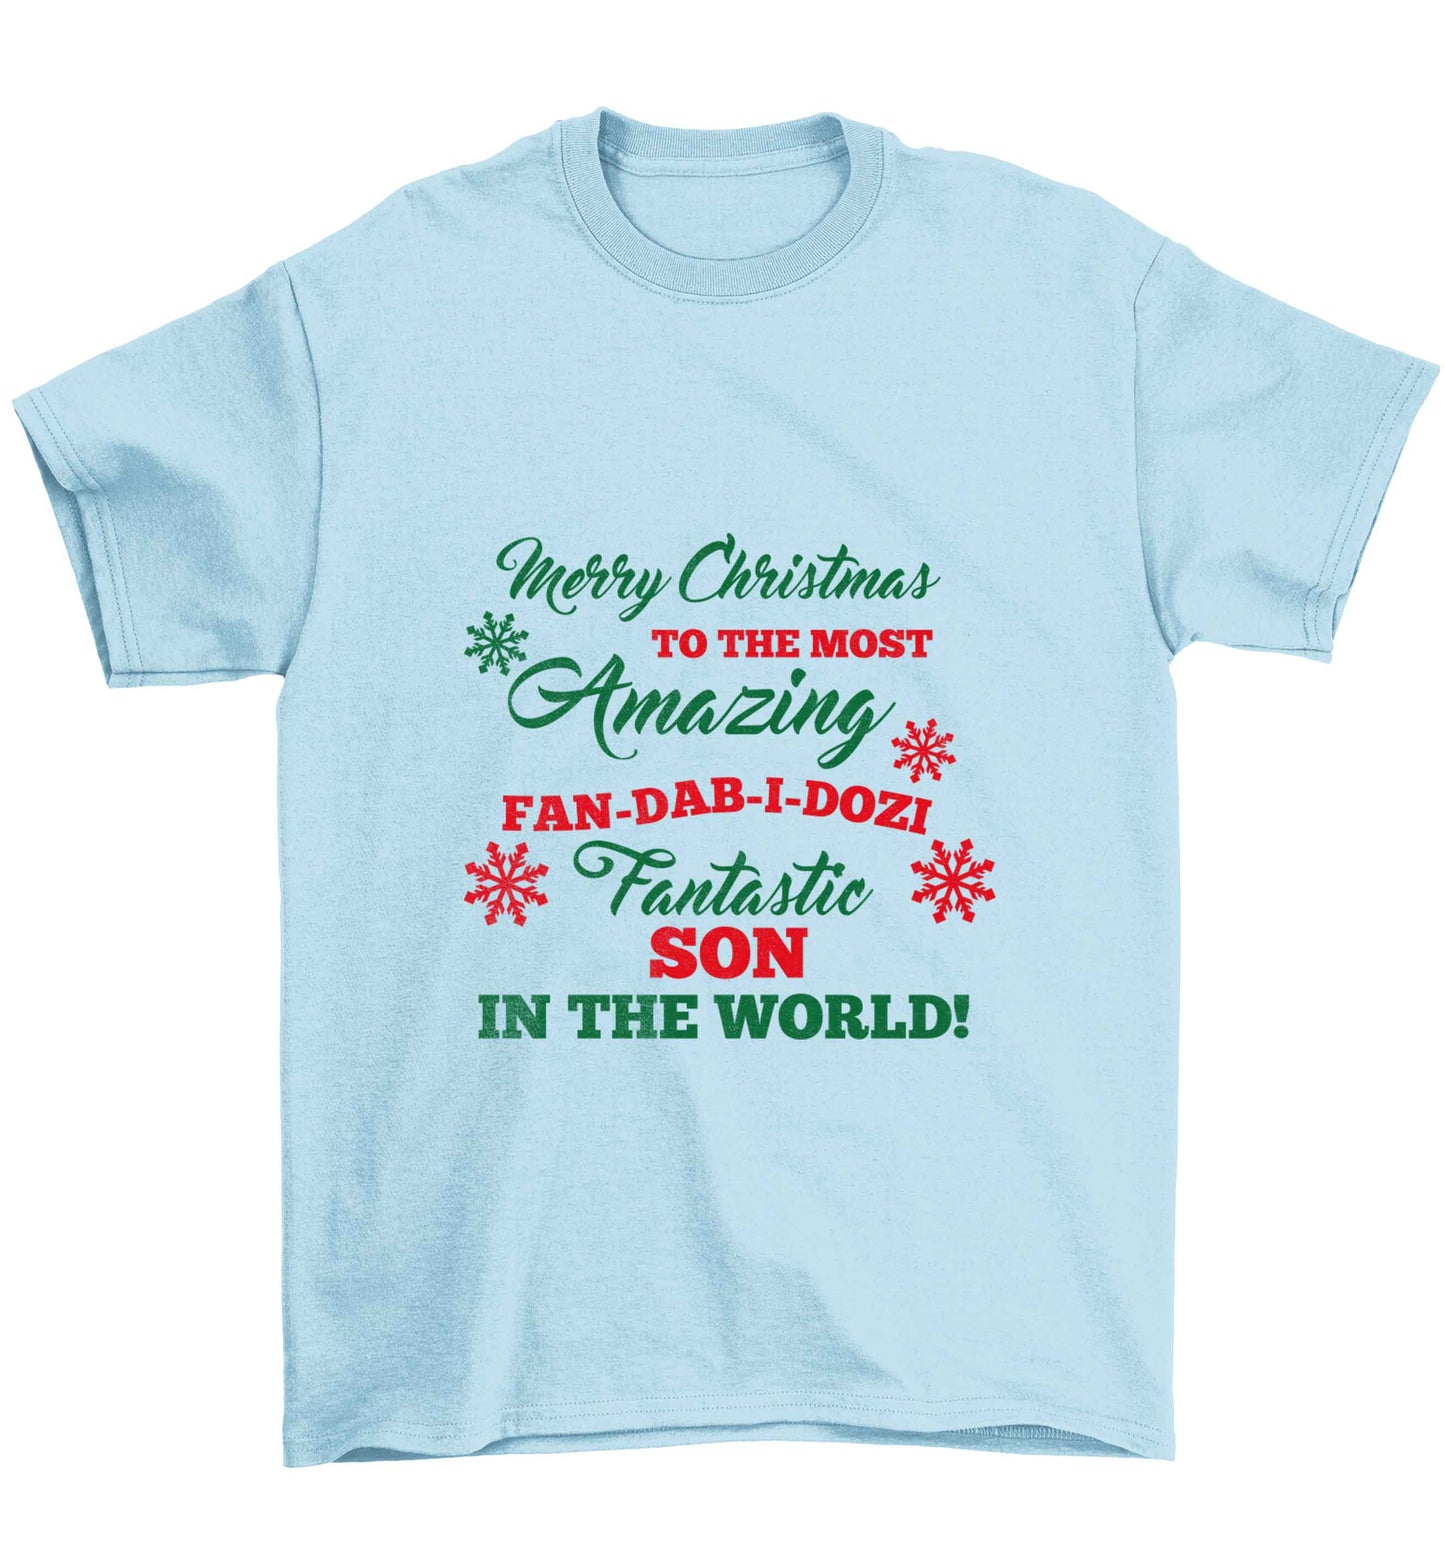 Merry Christmas to the most amazing fan-dab-i-dozi fantasic Son in the world Children's light blue Tshirt 12-13 Years